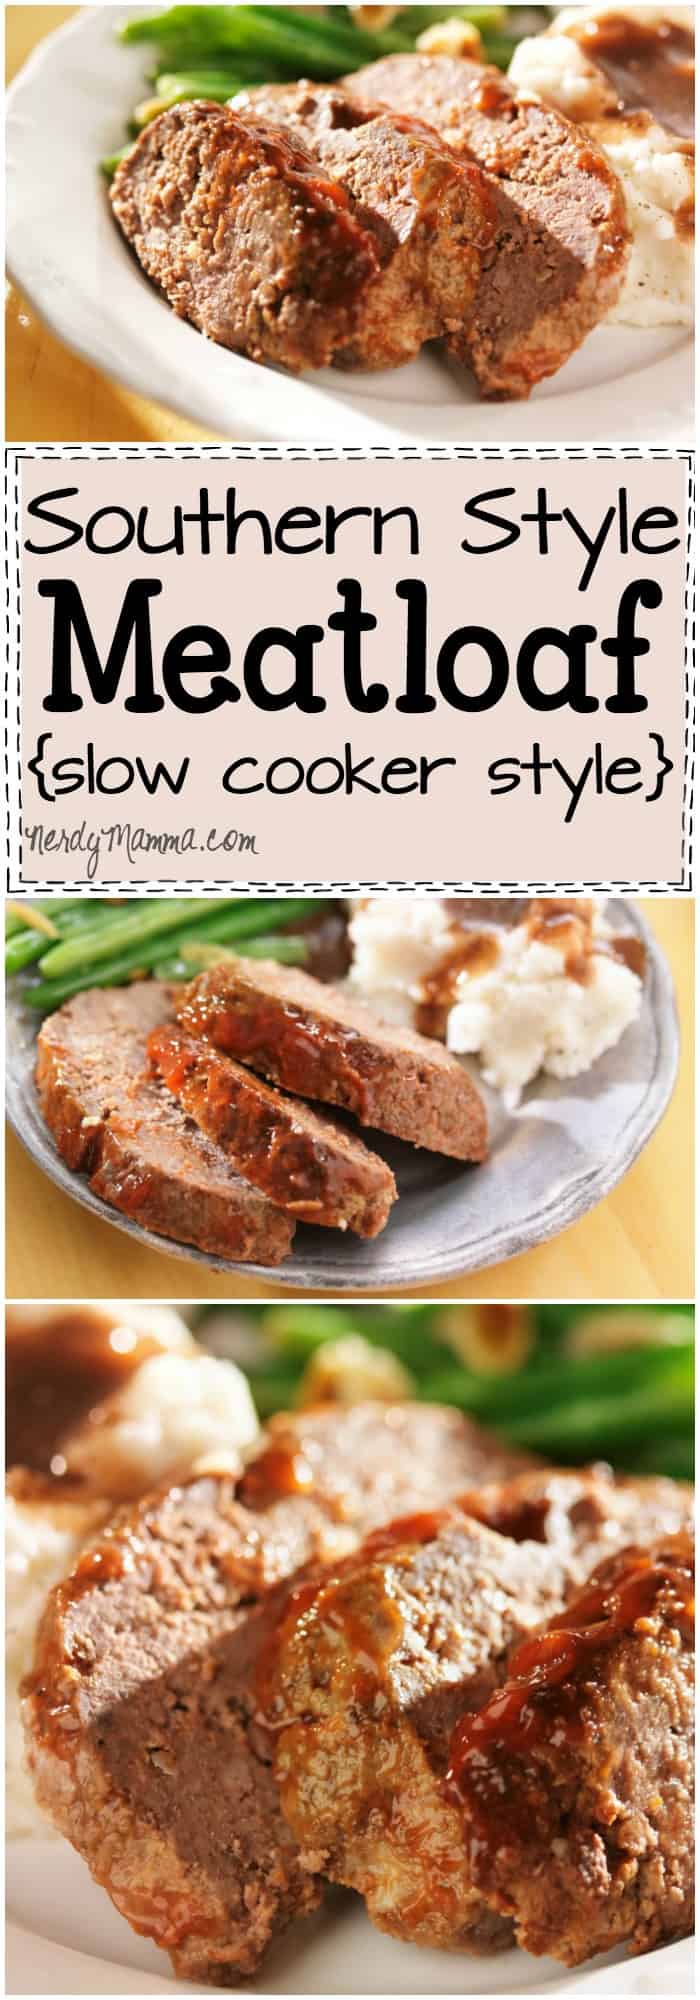 I love this recipe for Southern Style Meatloaf in the Crock Pot. I mean, seriously. I didn't even know you could make meatloaf in the slow cooker.